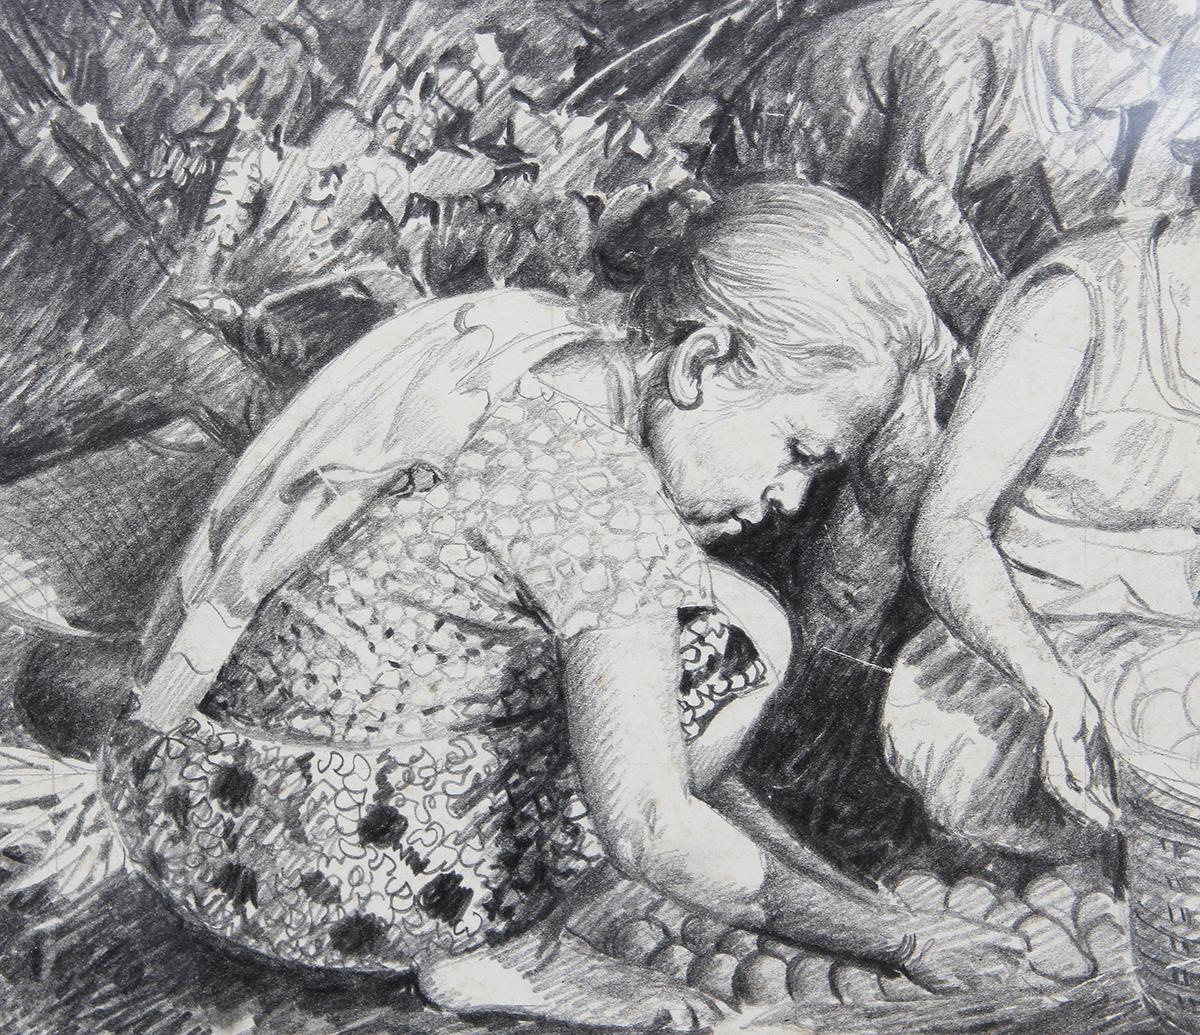 Pastoral pencil on paper sketch by a celebrated Filipino artist, Jose V. Blanco. The drawing depicts Filipino women and children sorting out mangoes in woven baskets. This depicts the simple way of life in rural areas in the Philippines where most